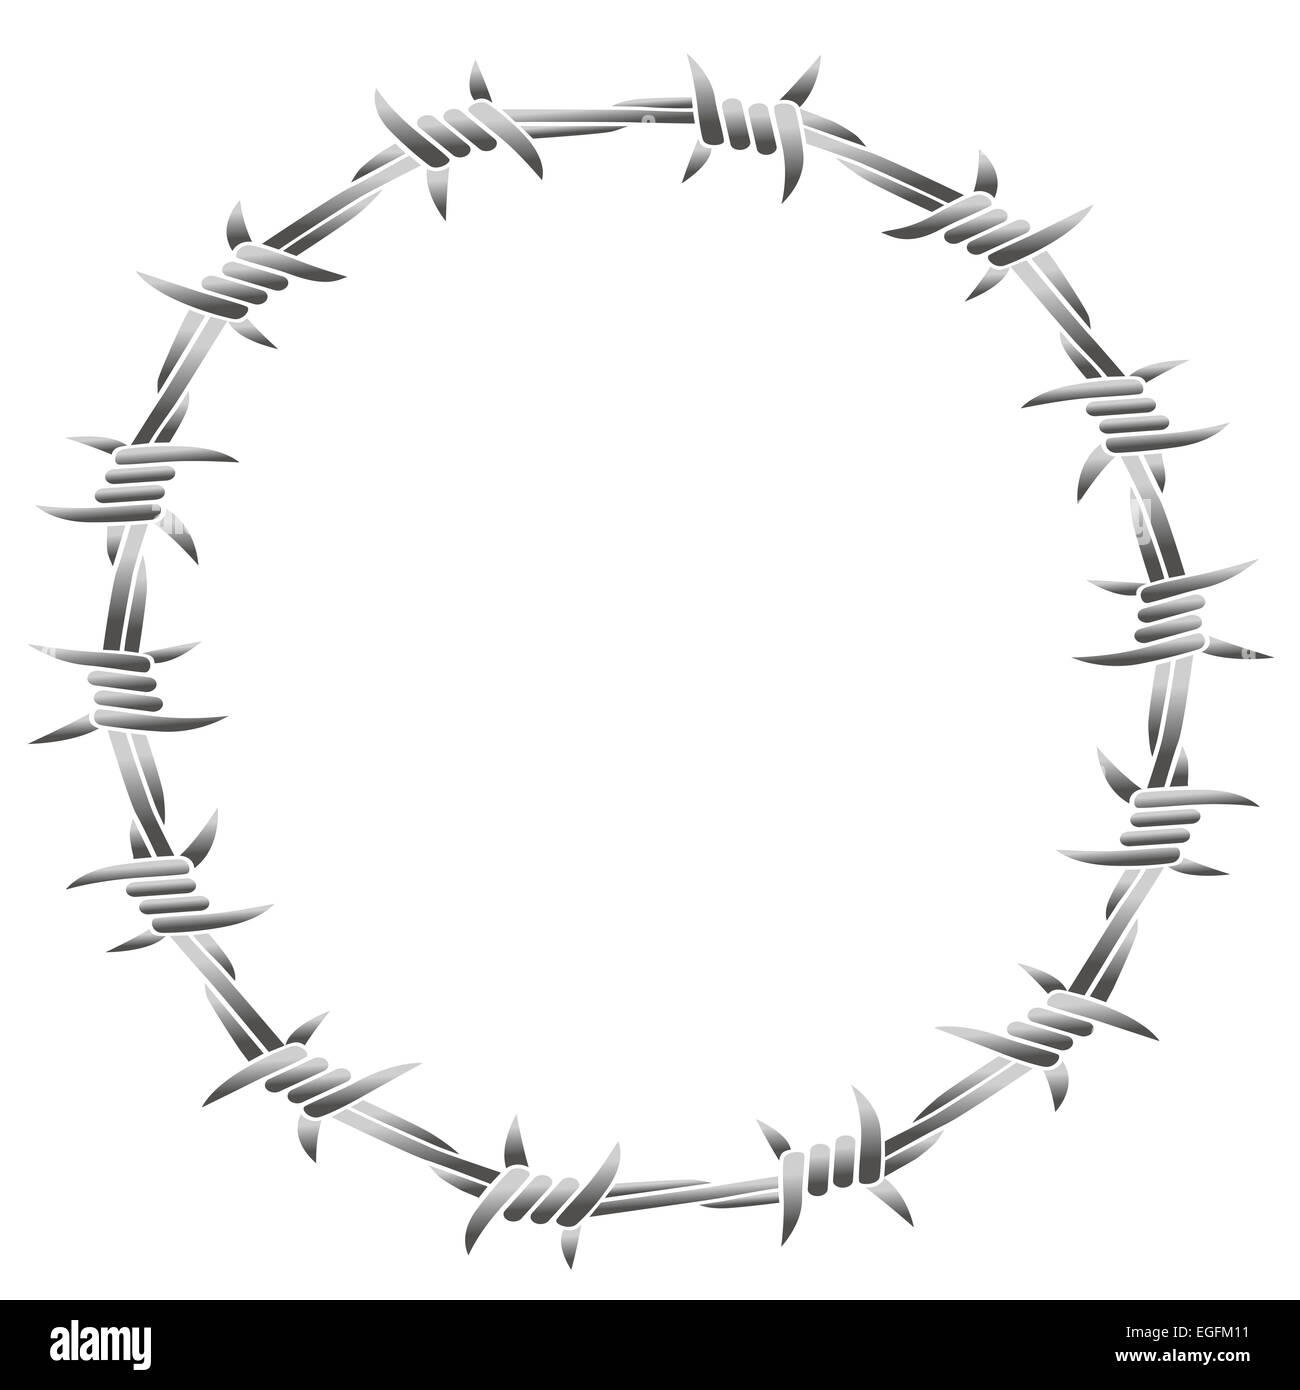 Barbed wire forming a round frame. Stock Photo